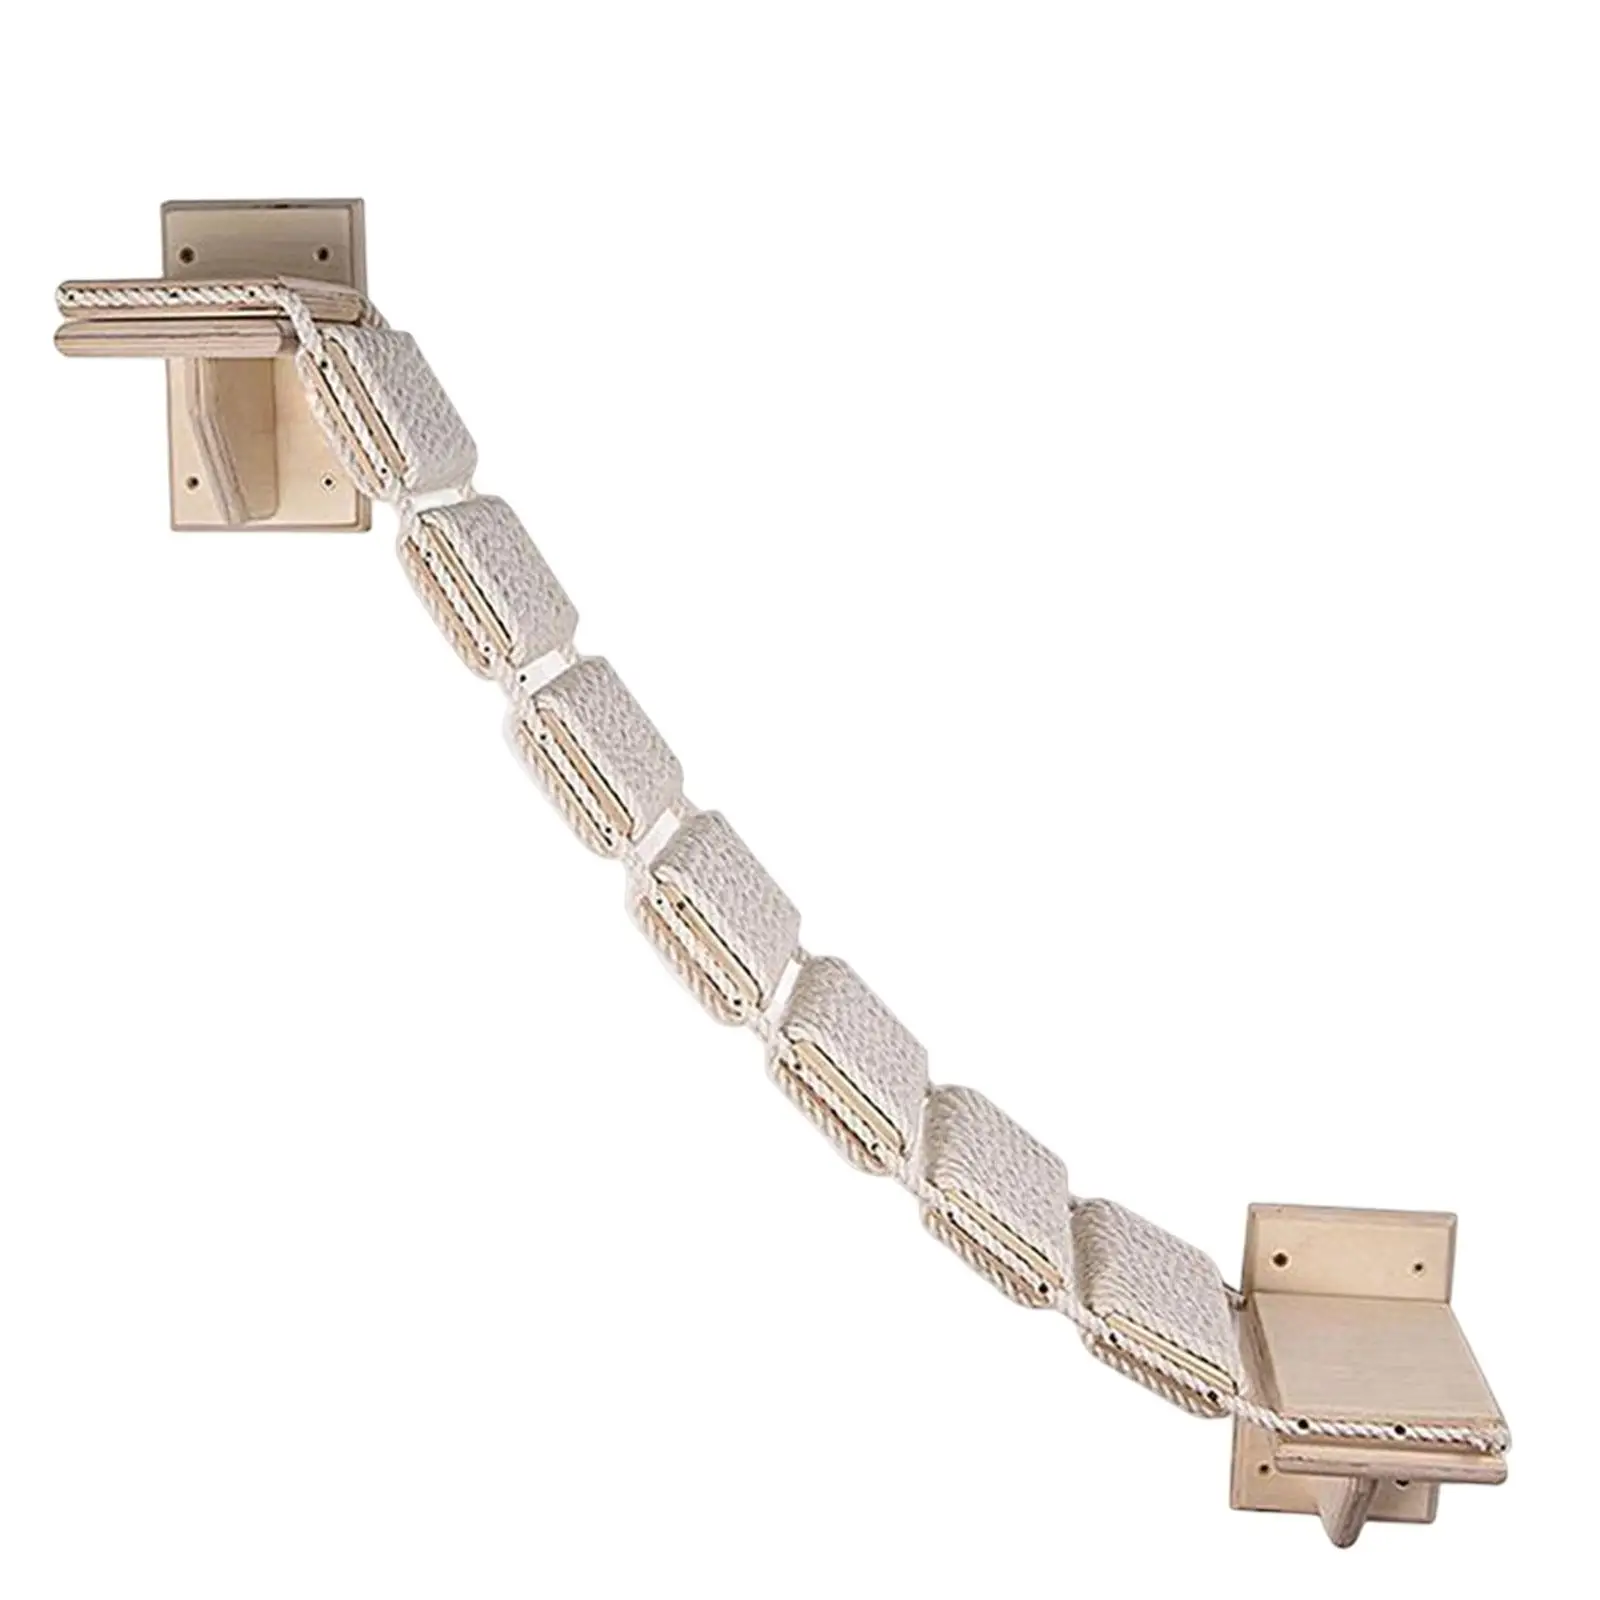 Cat Bridges wall ladder steps Ladder Walkway Cat Supplies Bridge Stairs Climbing wall Mounted for Indoor Cats Pet Cats Lounging